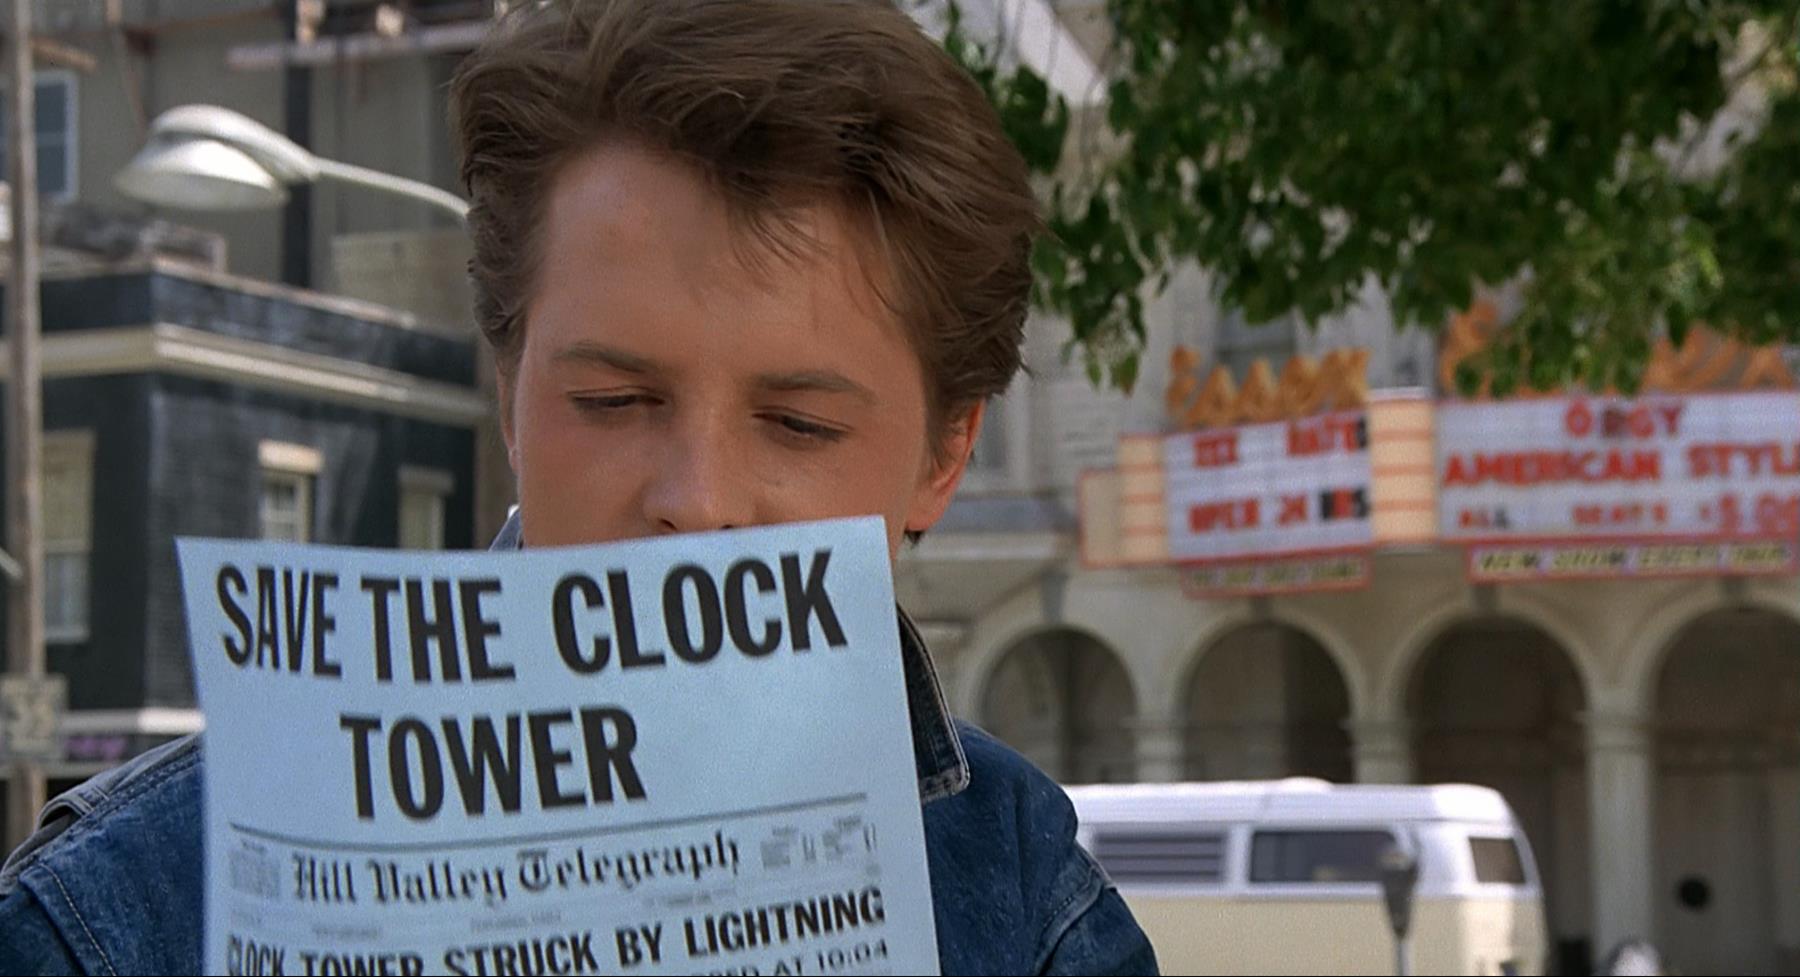 BACK TO THE FUTURE (1985) - Set of Four "Save The Clock Tower" Flyers - Image 7 of 7